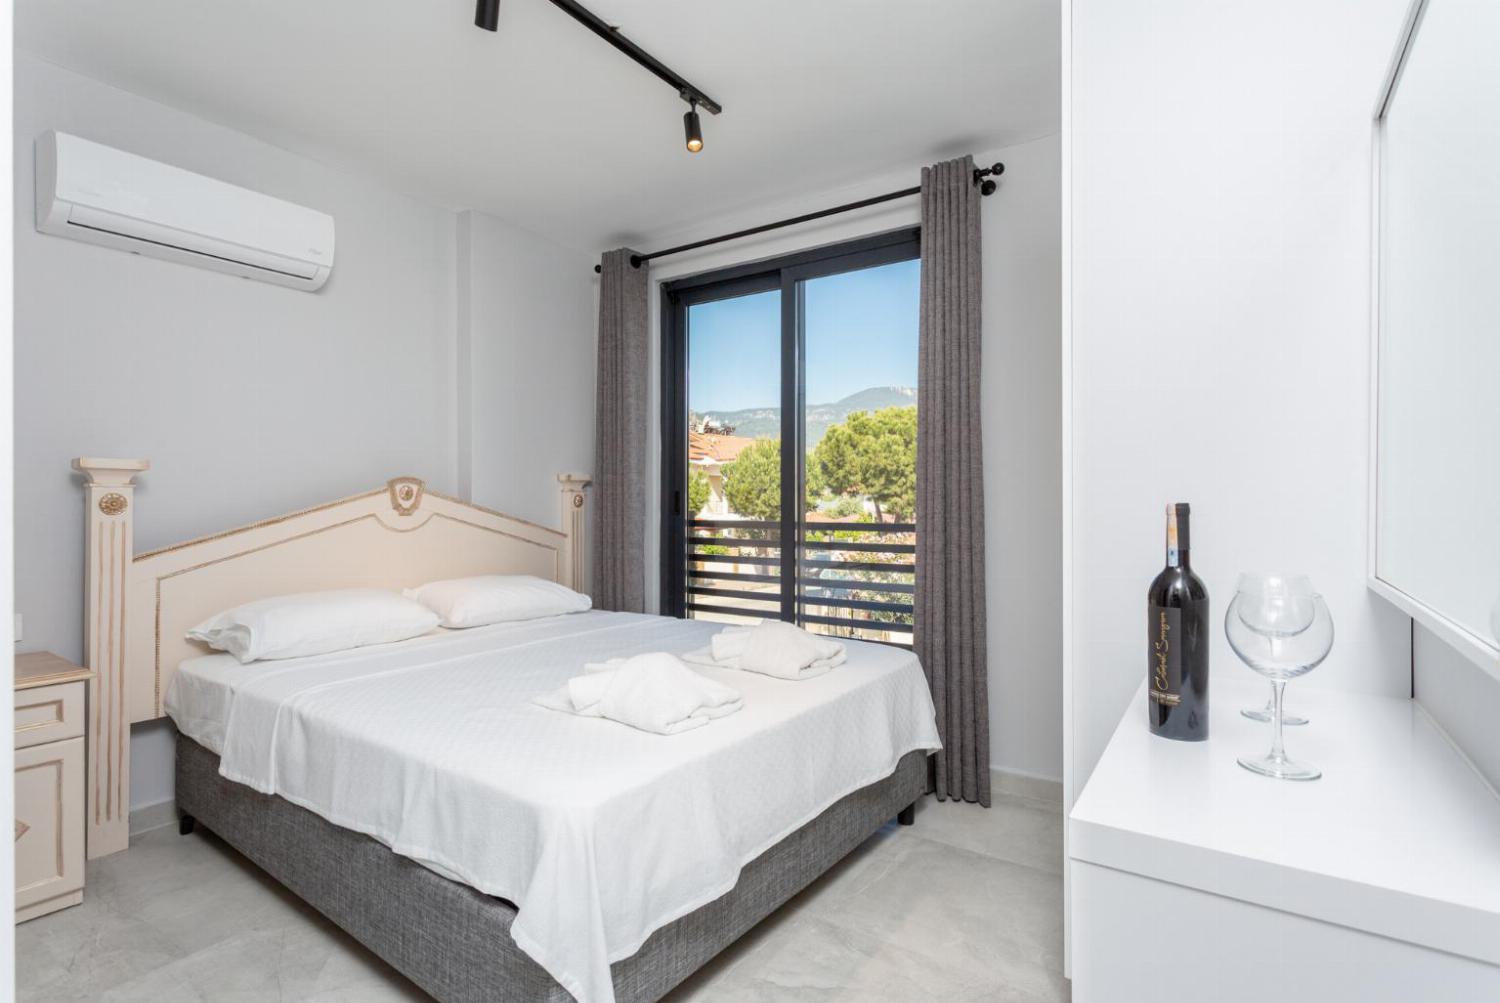 Double bedroom with an en suite bathroom, A/C and balcony access 